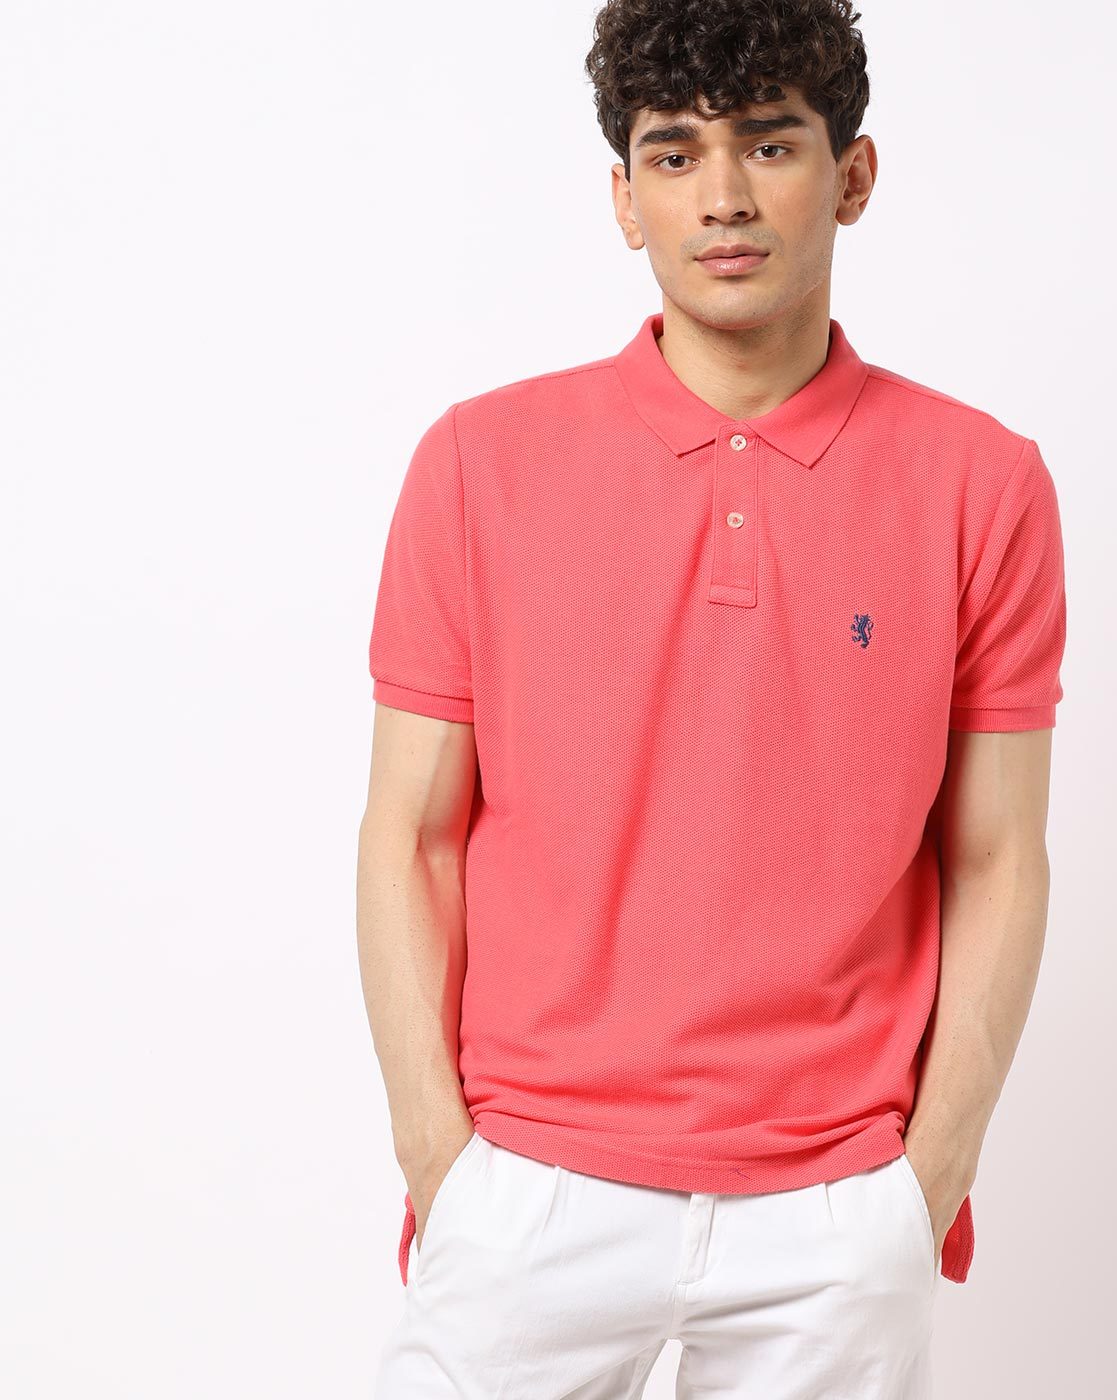 red tape polo t shirt